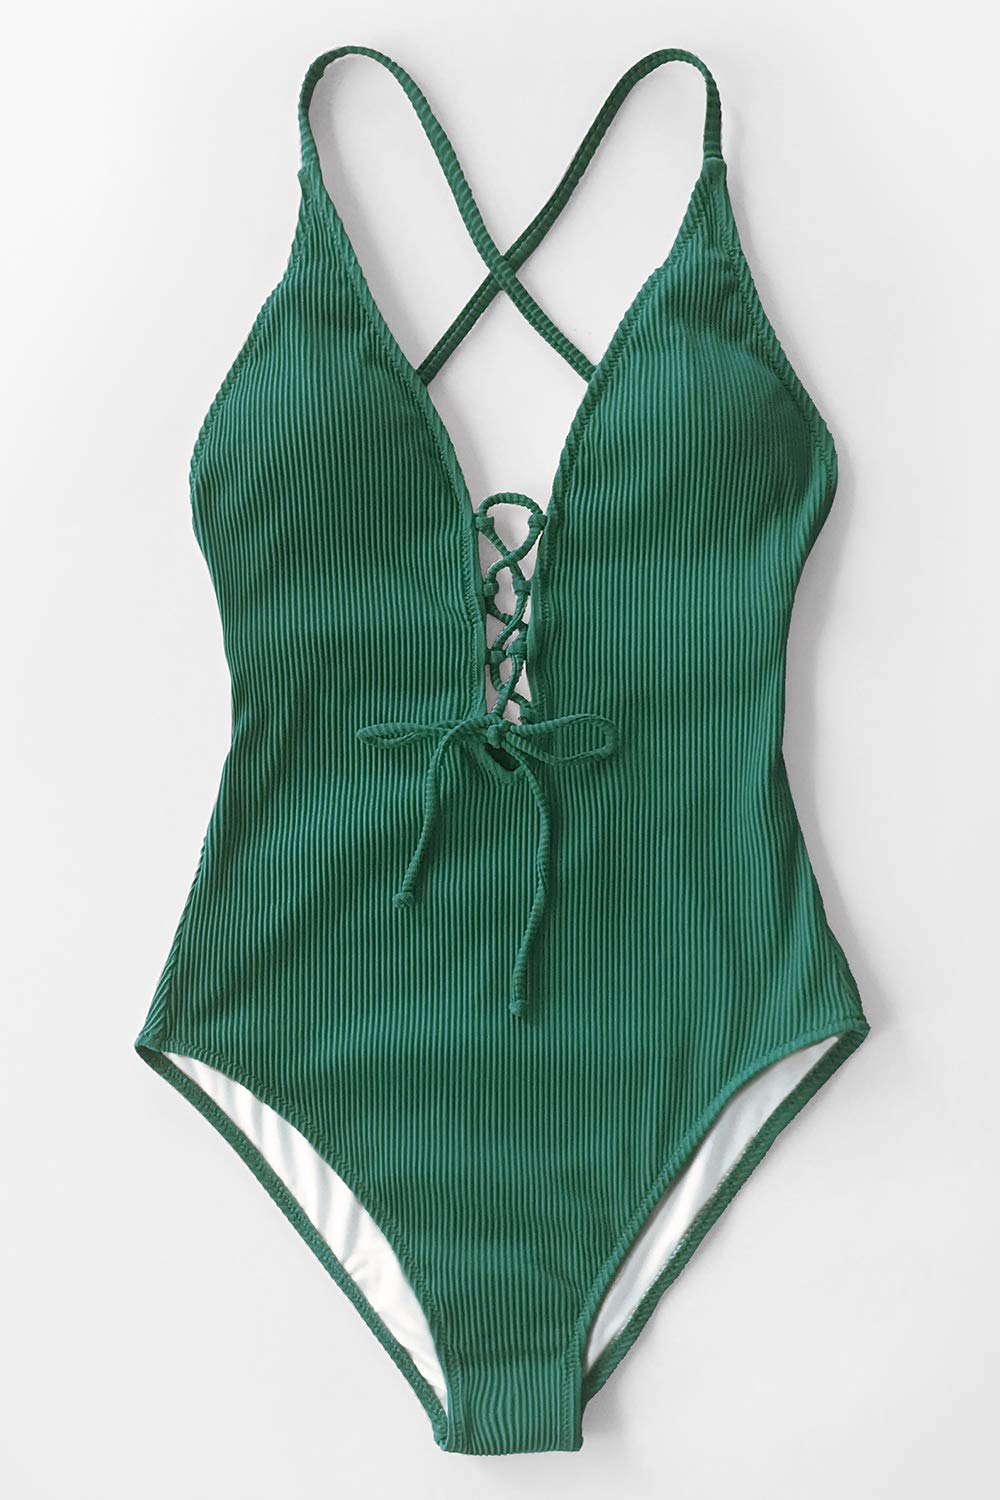 Cupshe Women's Green V Neck One Piece Swimsuit Lace up Monokini, XS - image 4 of 4